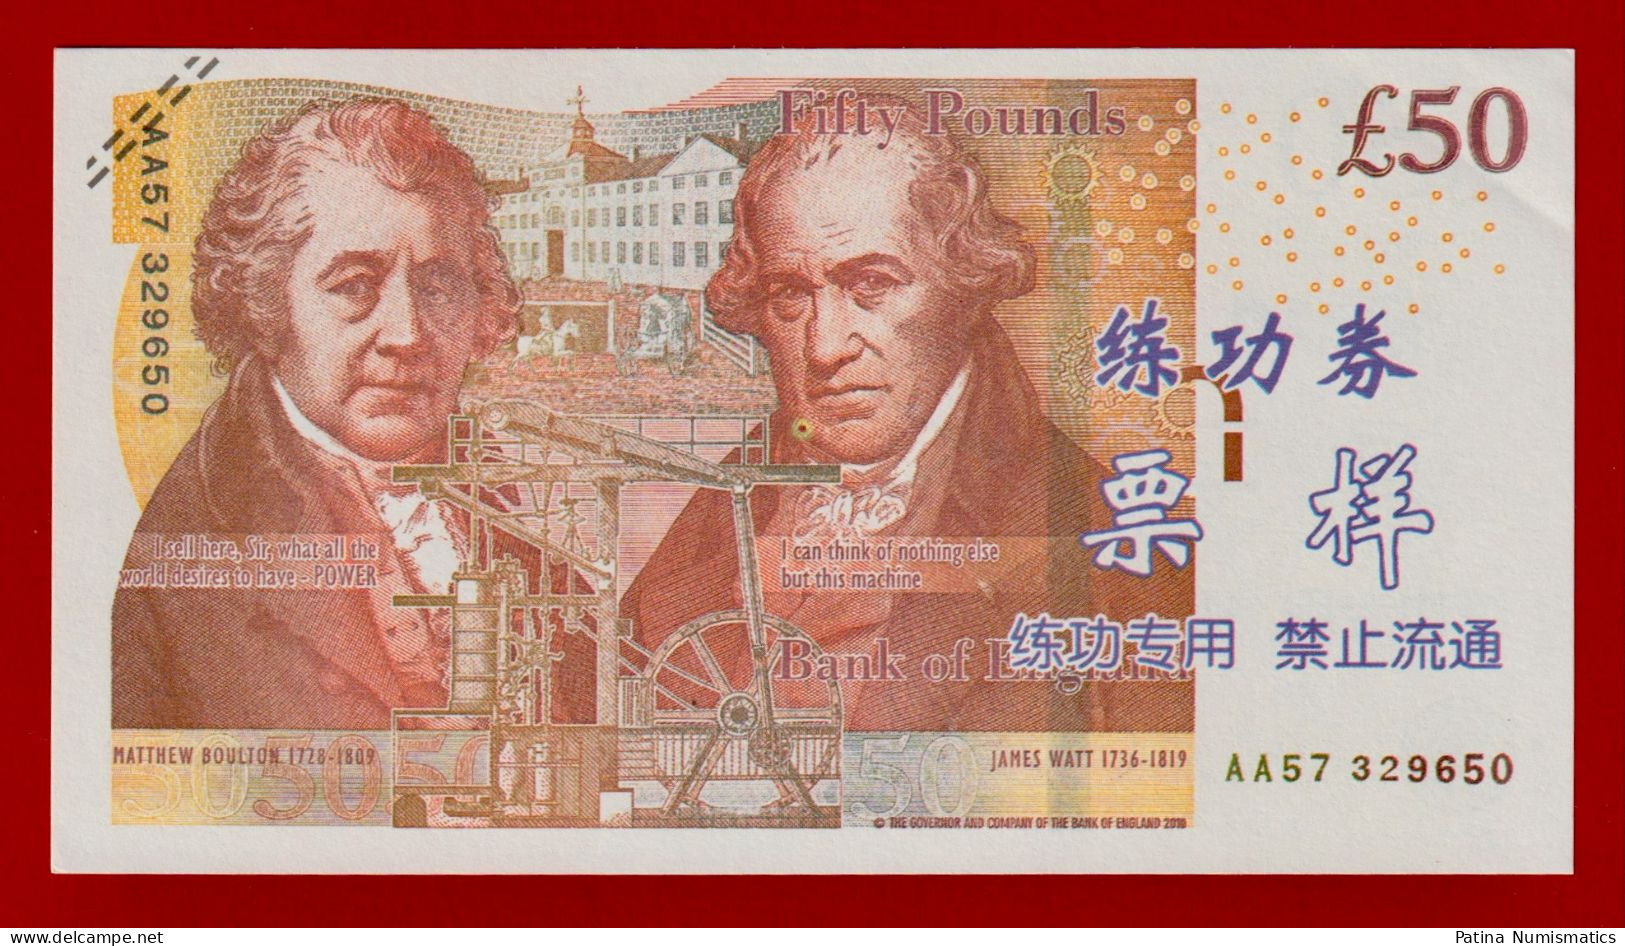 REPLIKA GREAT BRITAIN 50 Pounds  CHINESE TRAINING NOTE REPRODUKTION - Autres - Europe